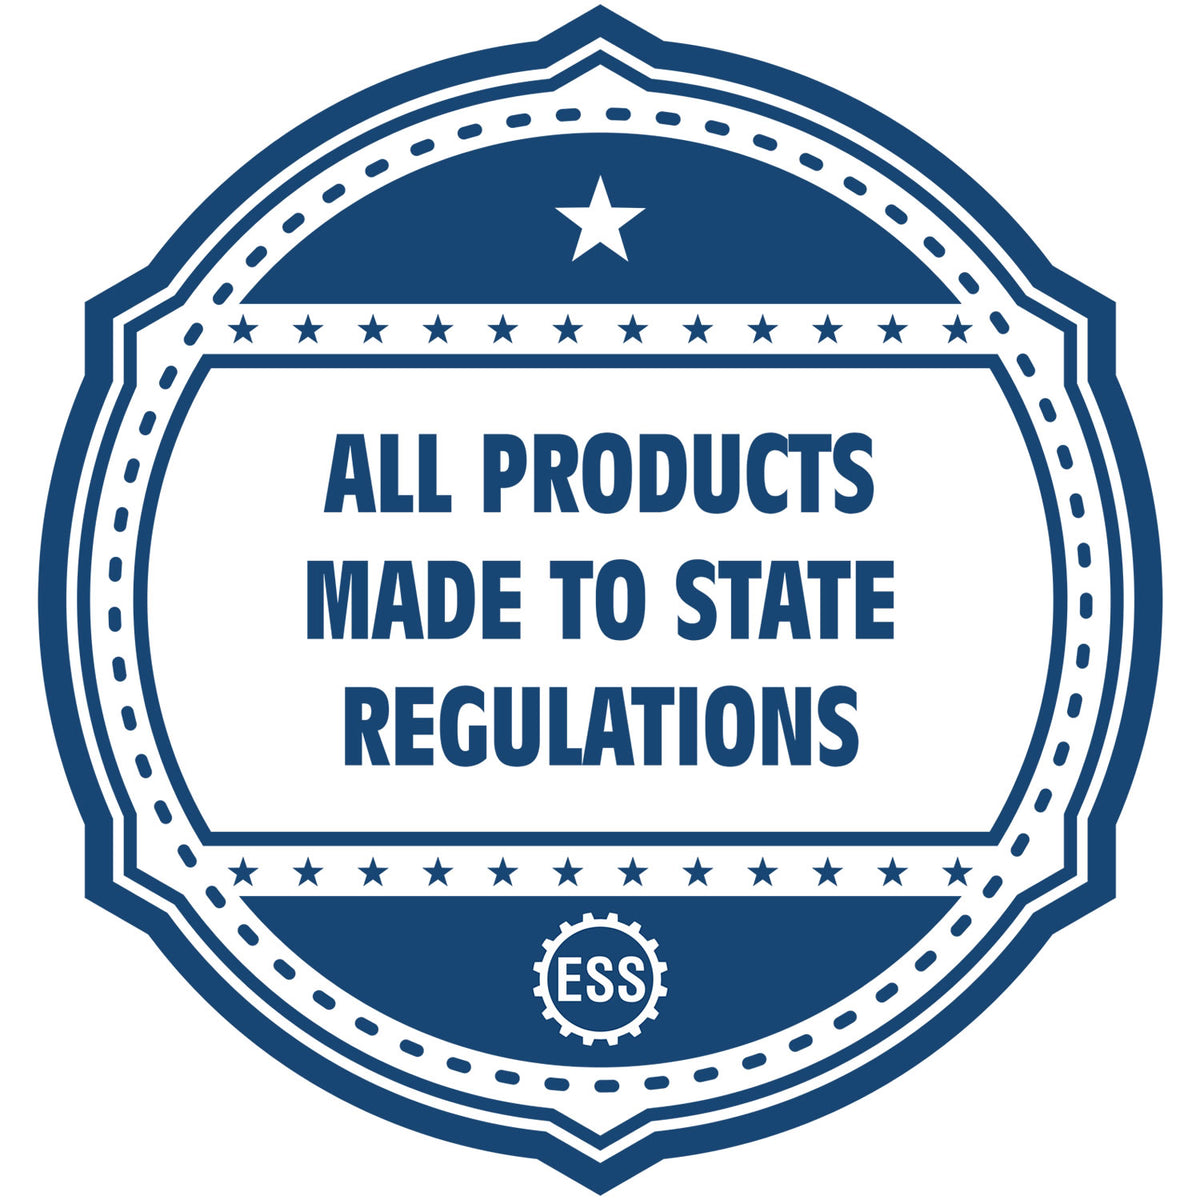 A blue icon or badge for the Hybrid South Dakota Engineer Seal showing that this product is made in compliance with state regulations.